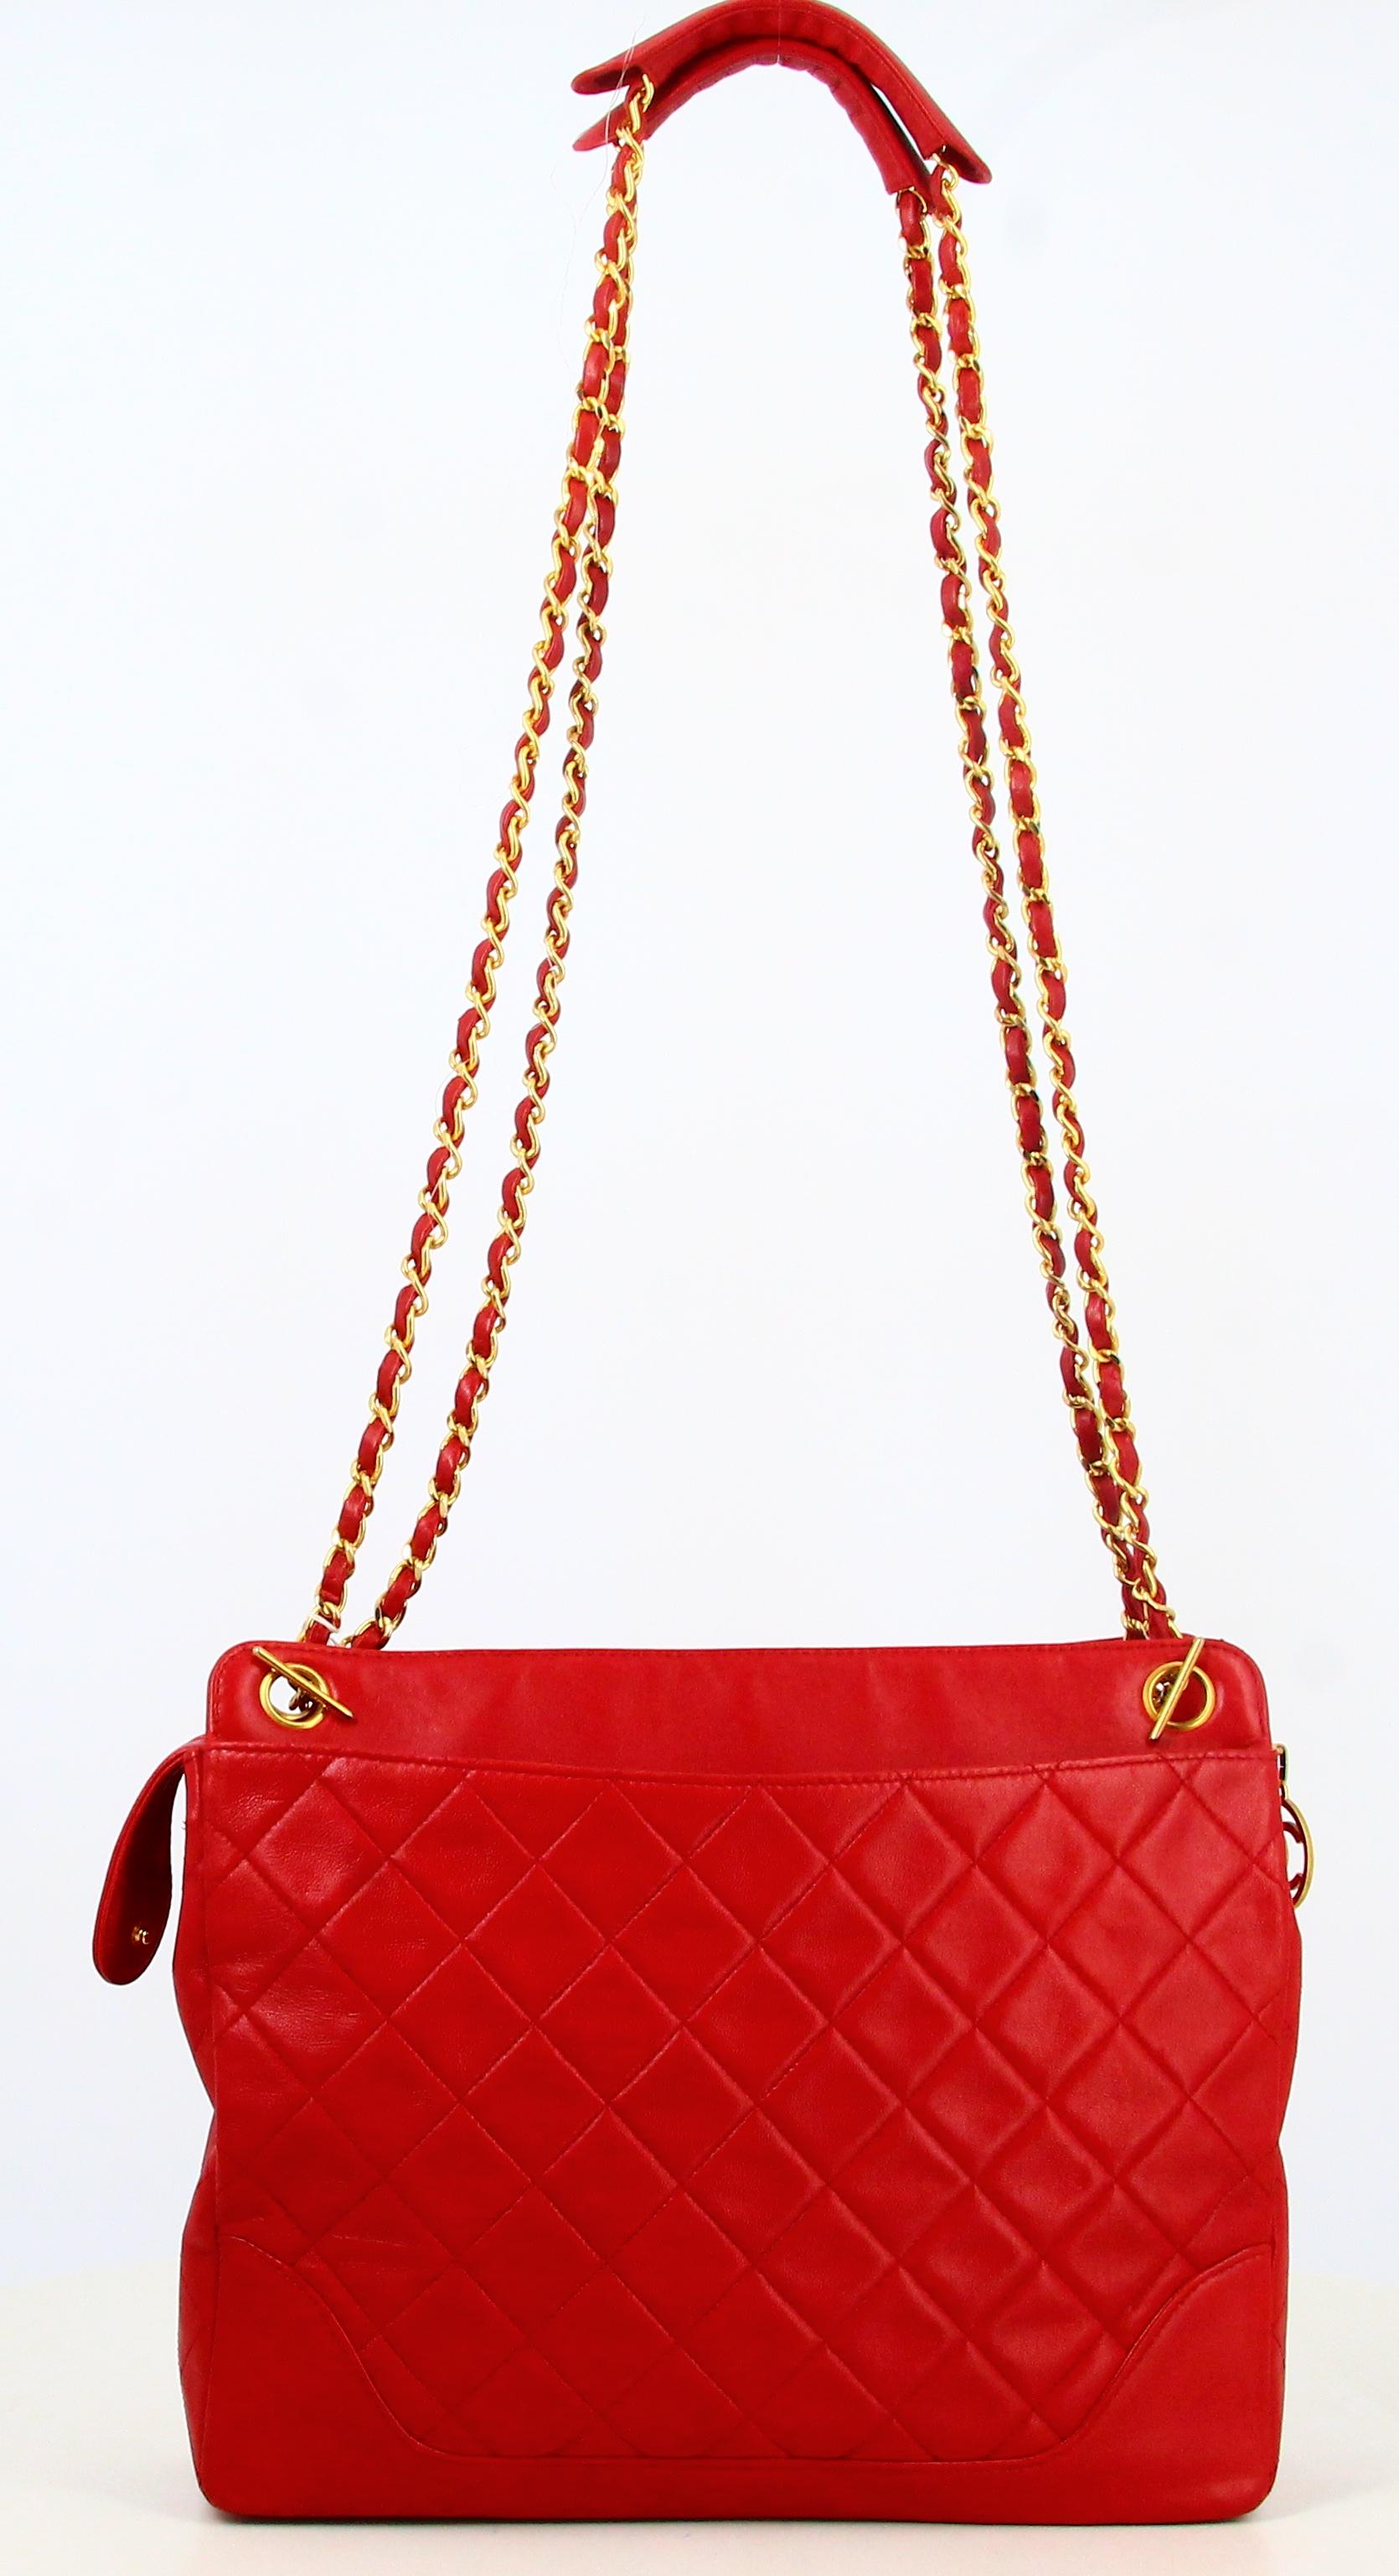 1989 Handbag Chanel quilted leather Red  2